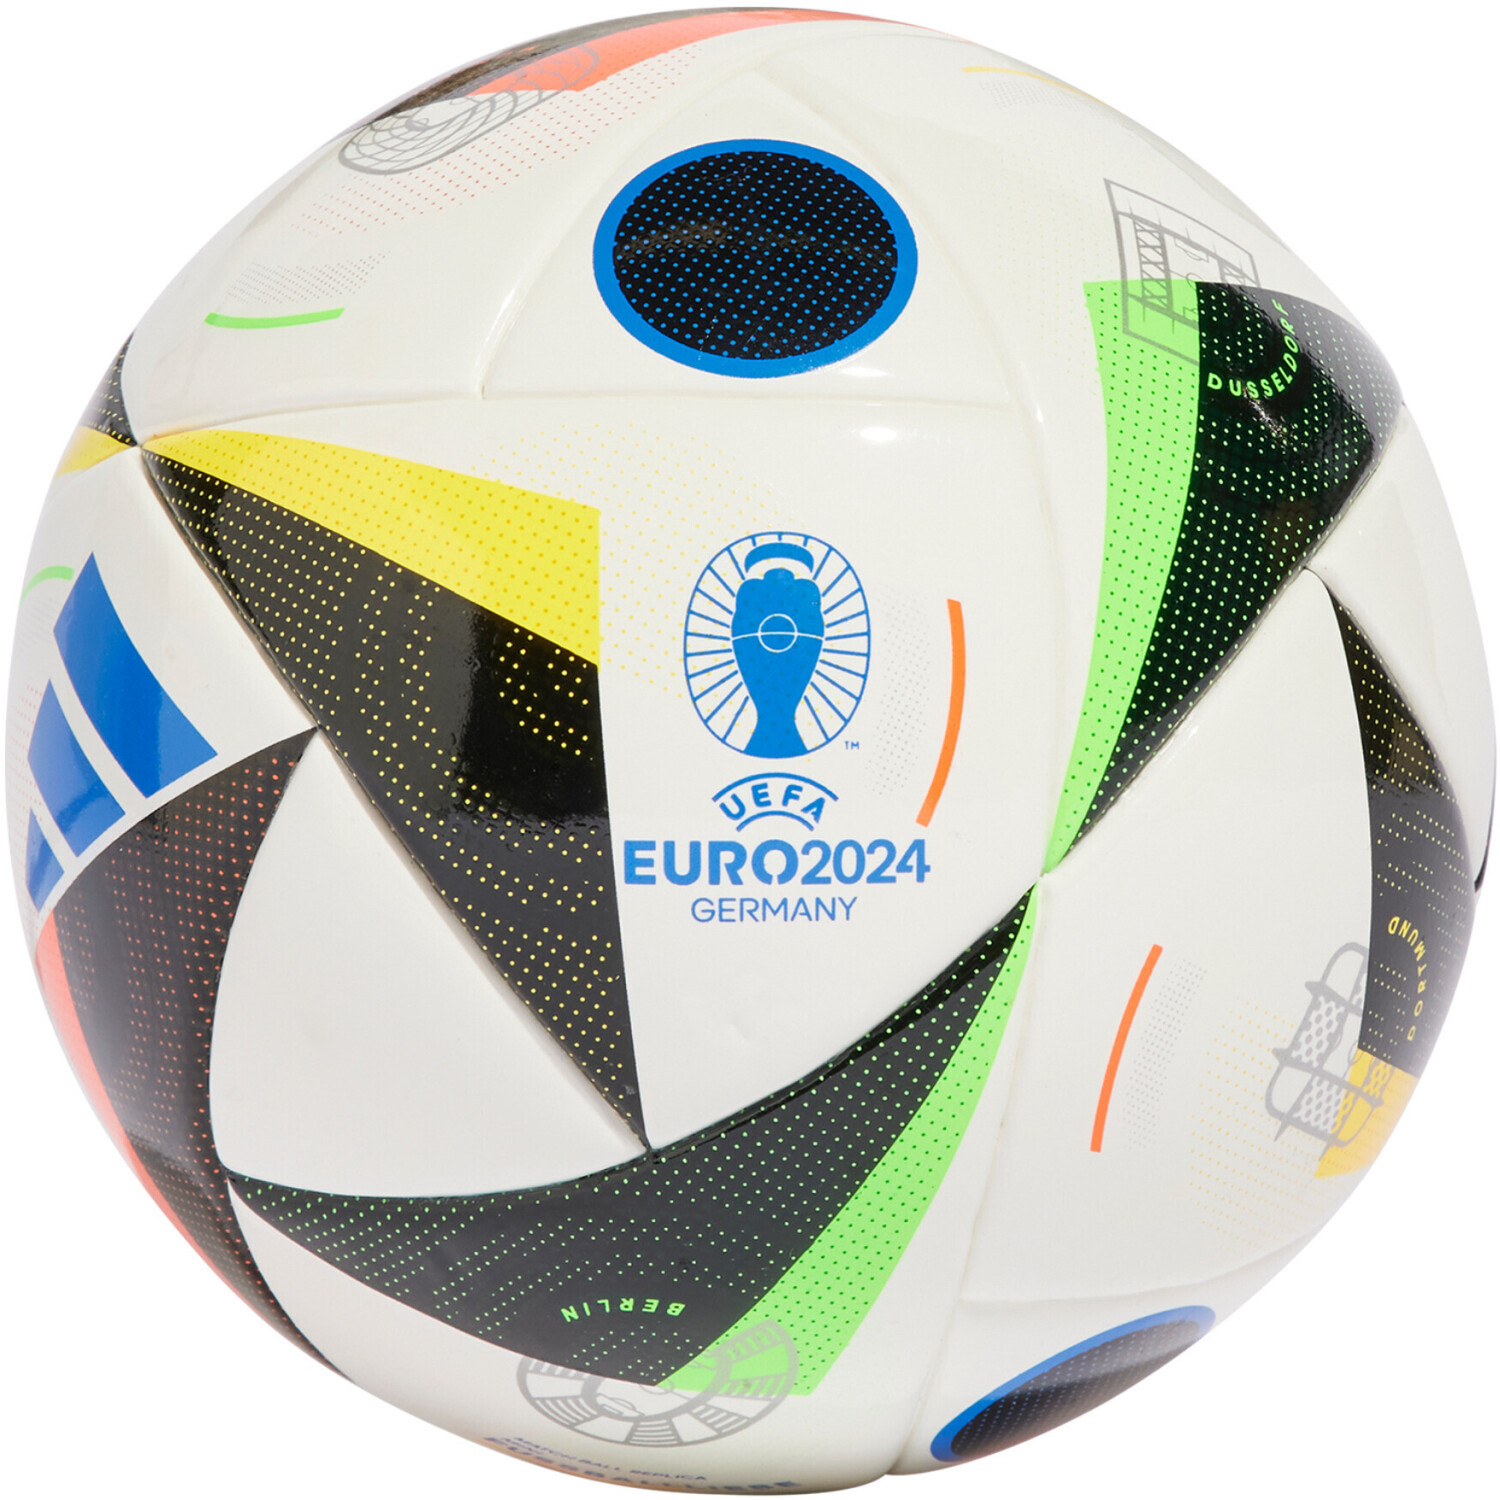 Buy Adidas Fußballliebe Mini (EURO24) from £10.99 (Today) – Best Deals on